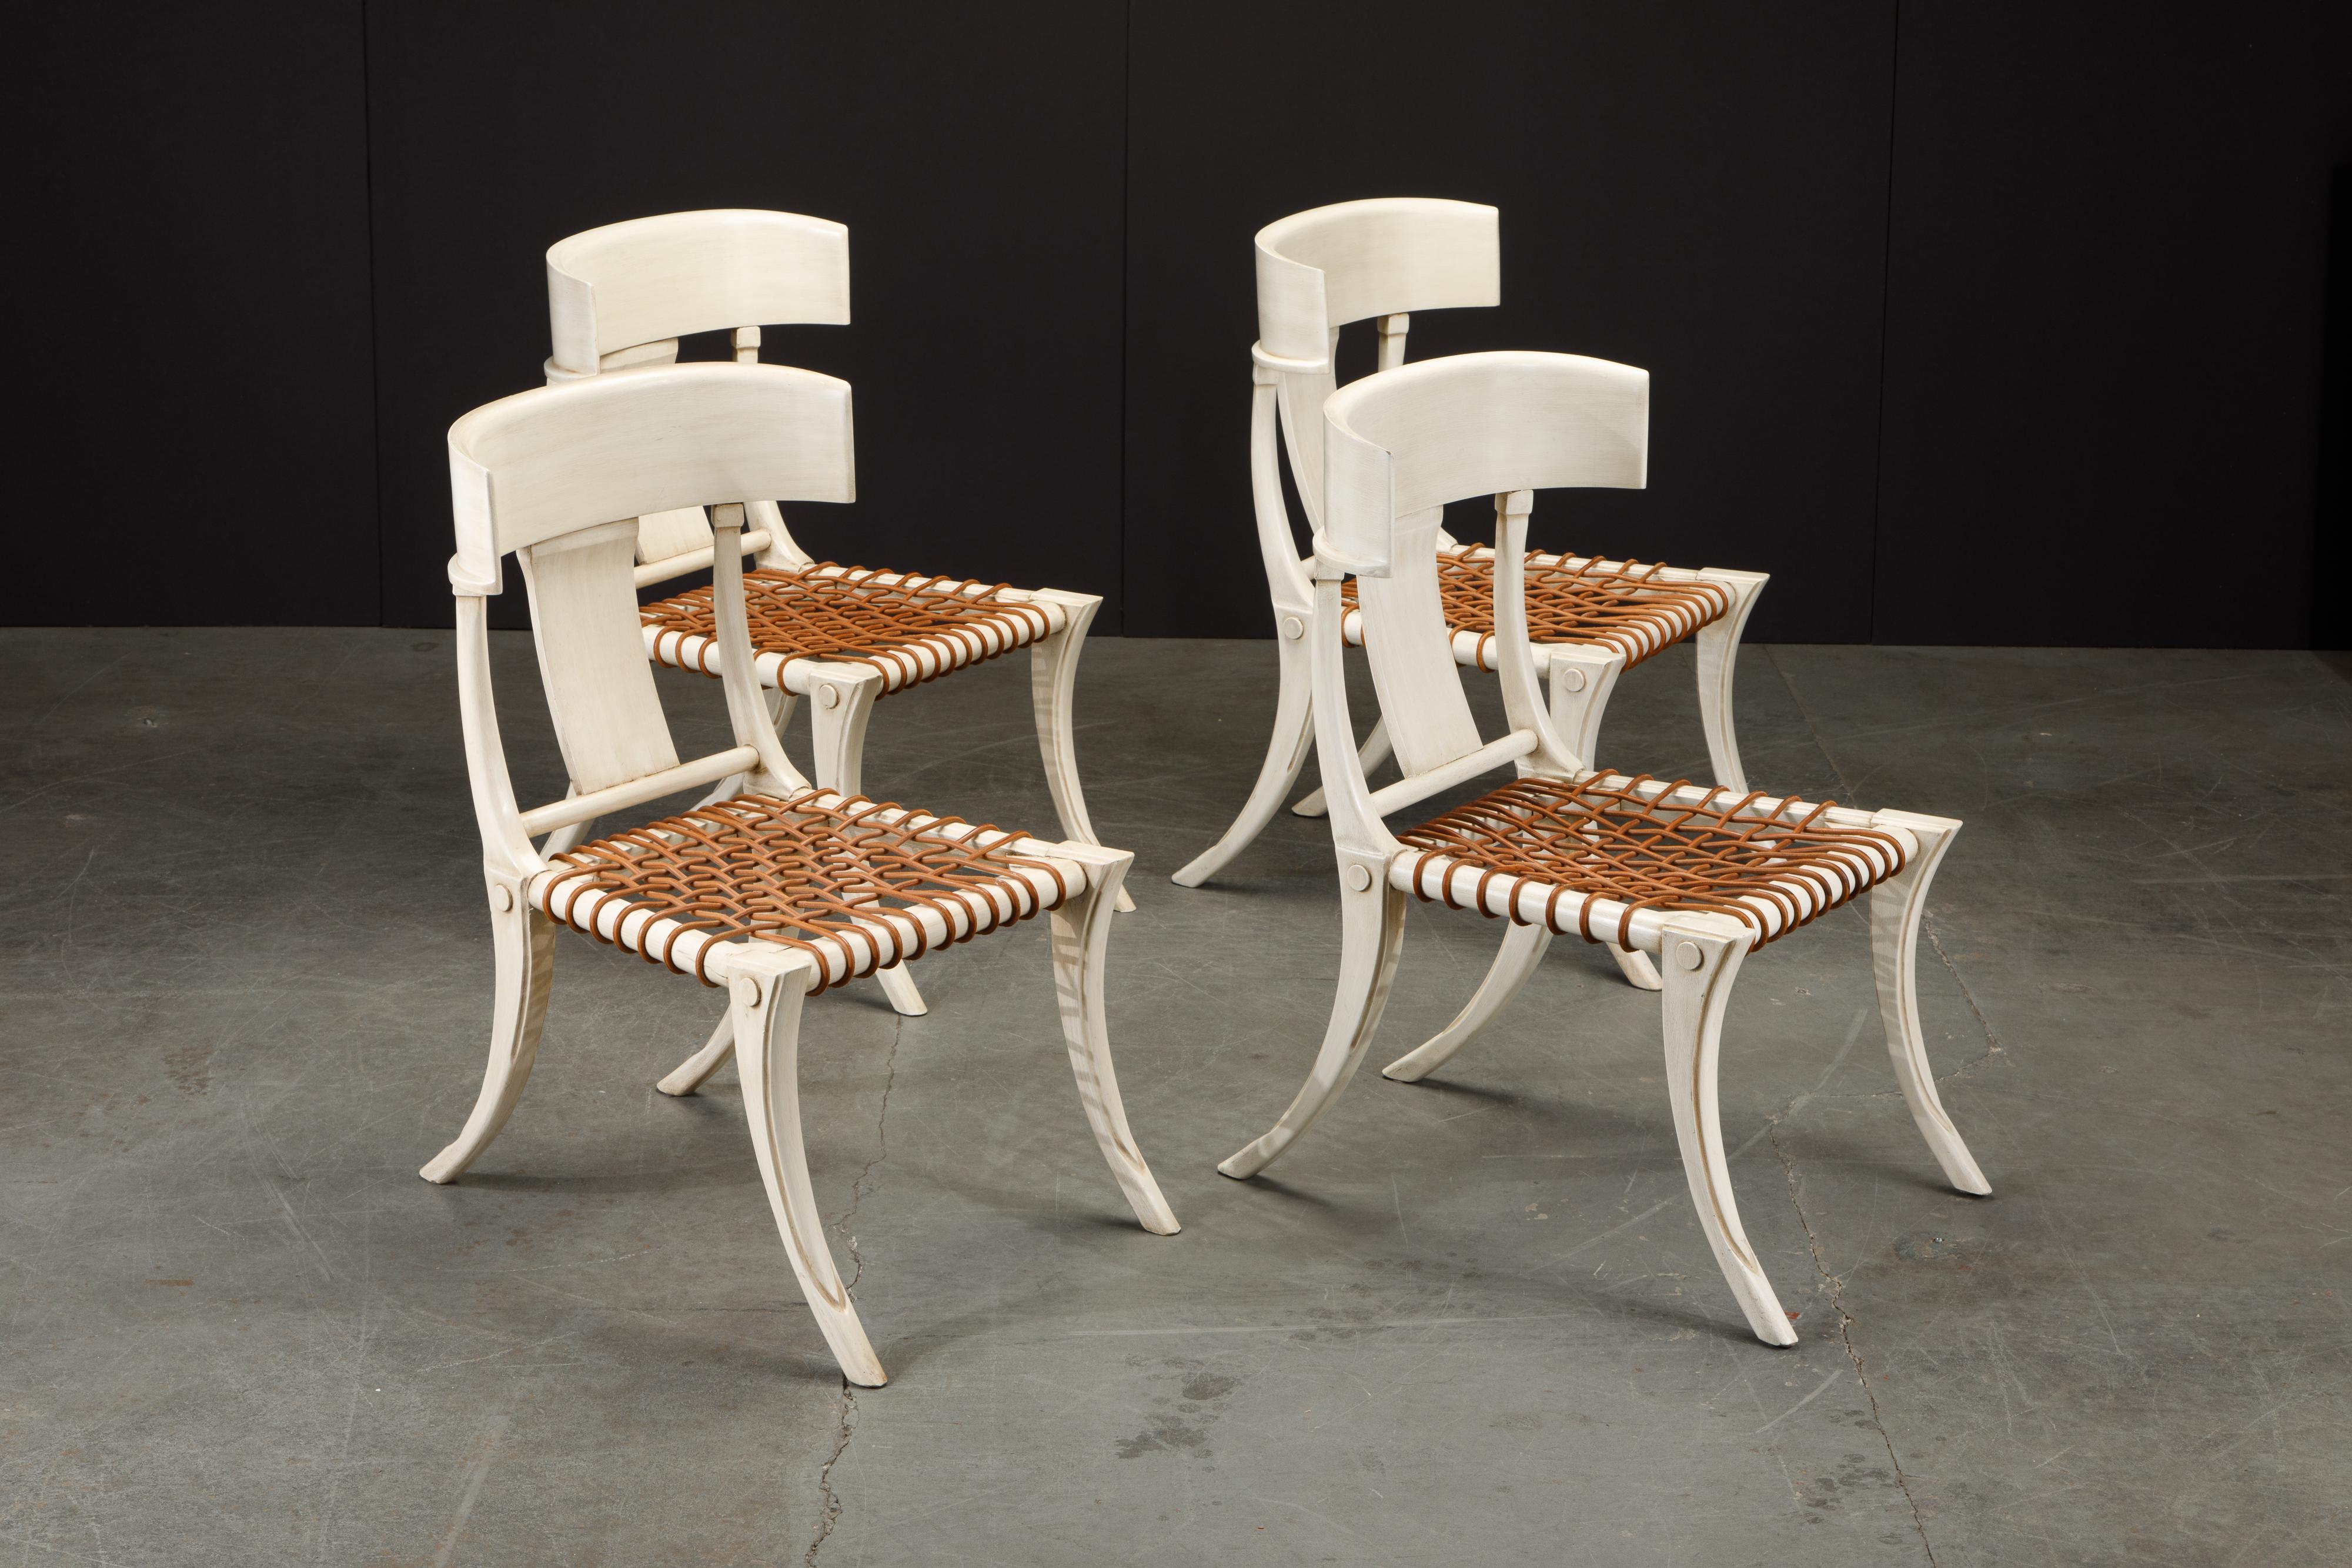 A set of four Klismos chairs in the style of T.H. Robsjohn Gibbings featuring off-white wood frames with leather strap seats. 

These Klismos chairs would work great in a Mid-Century Modern, Scandanavian Modern or Danish Modern home or penthouse